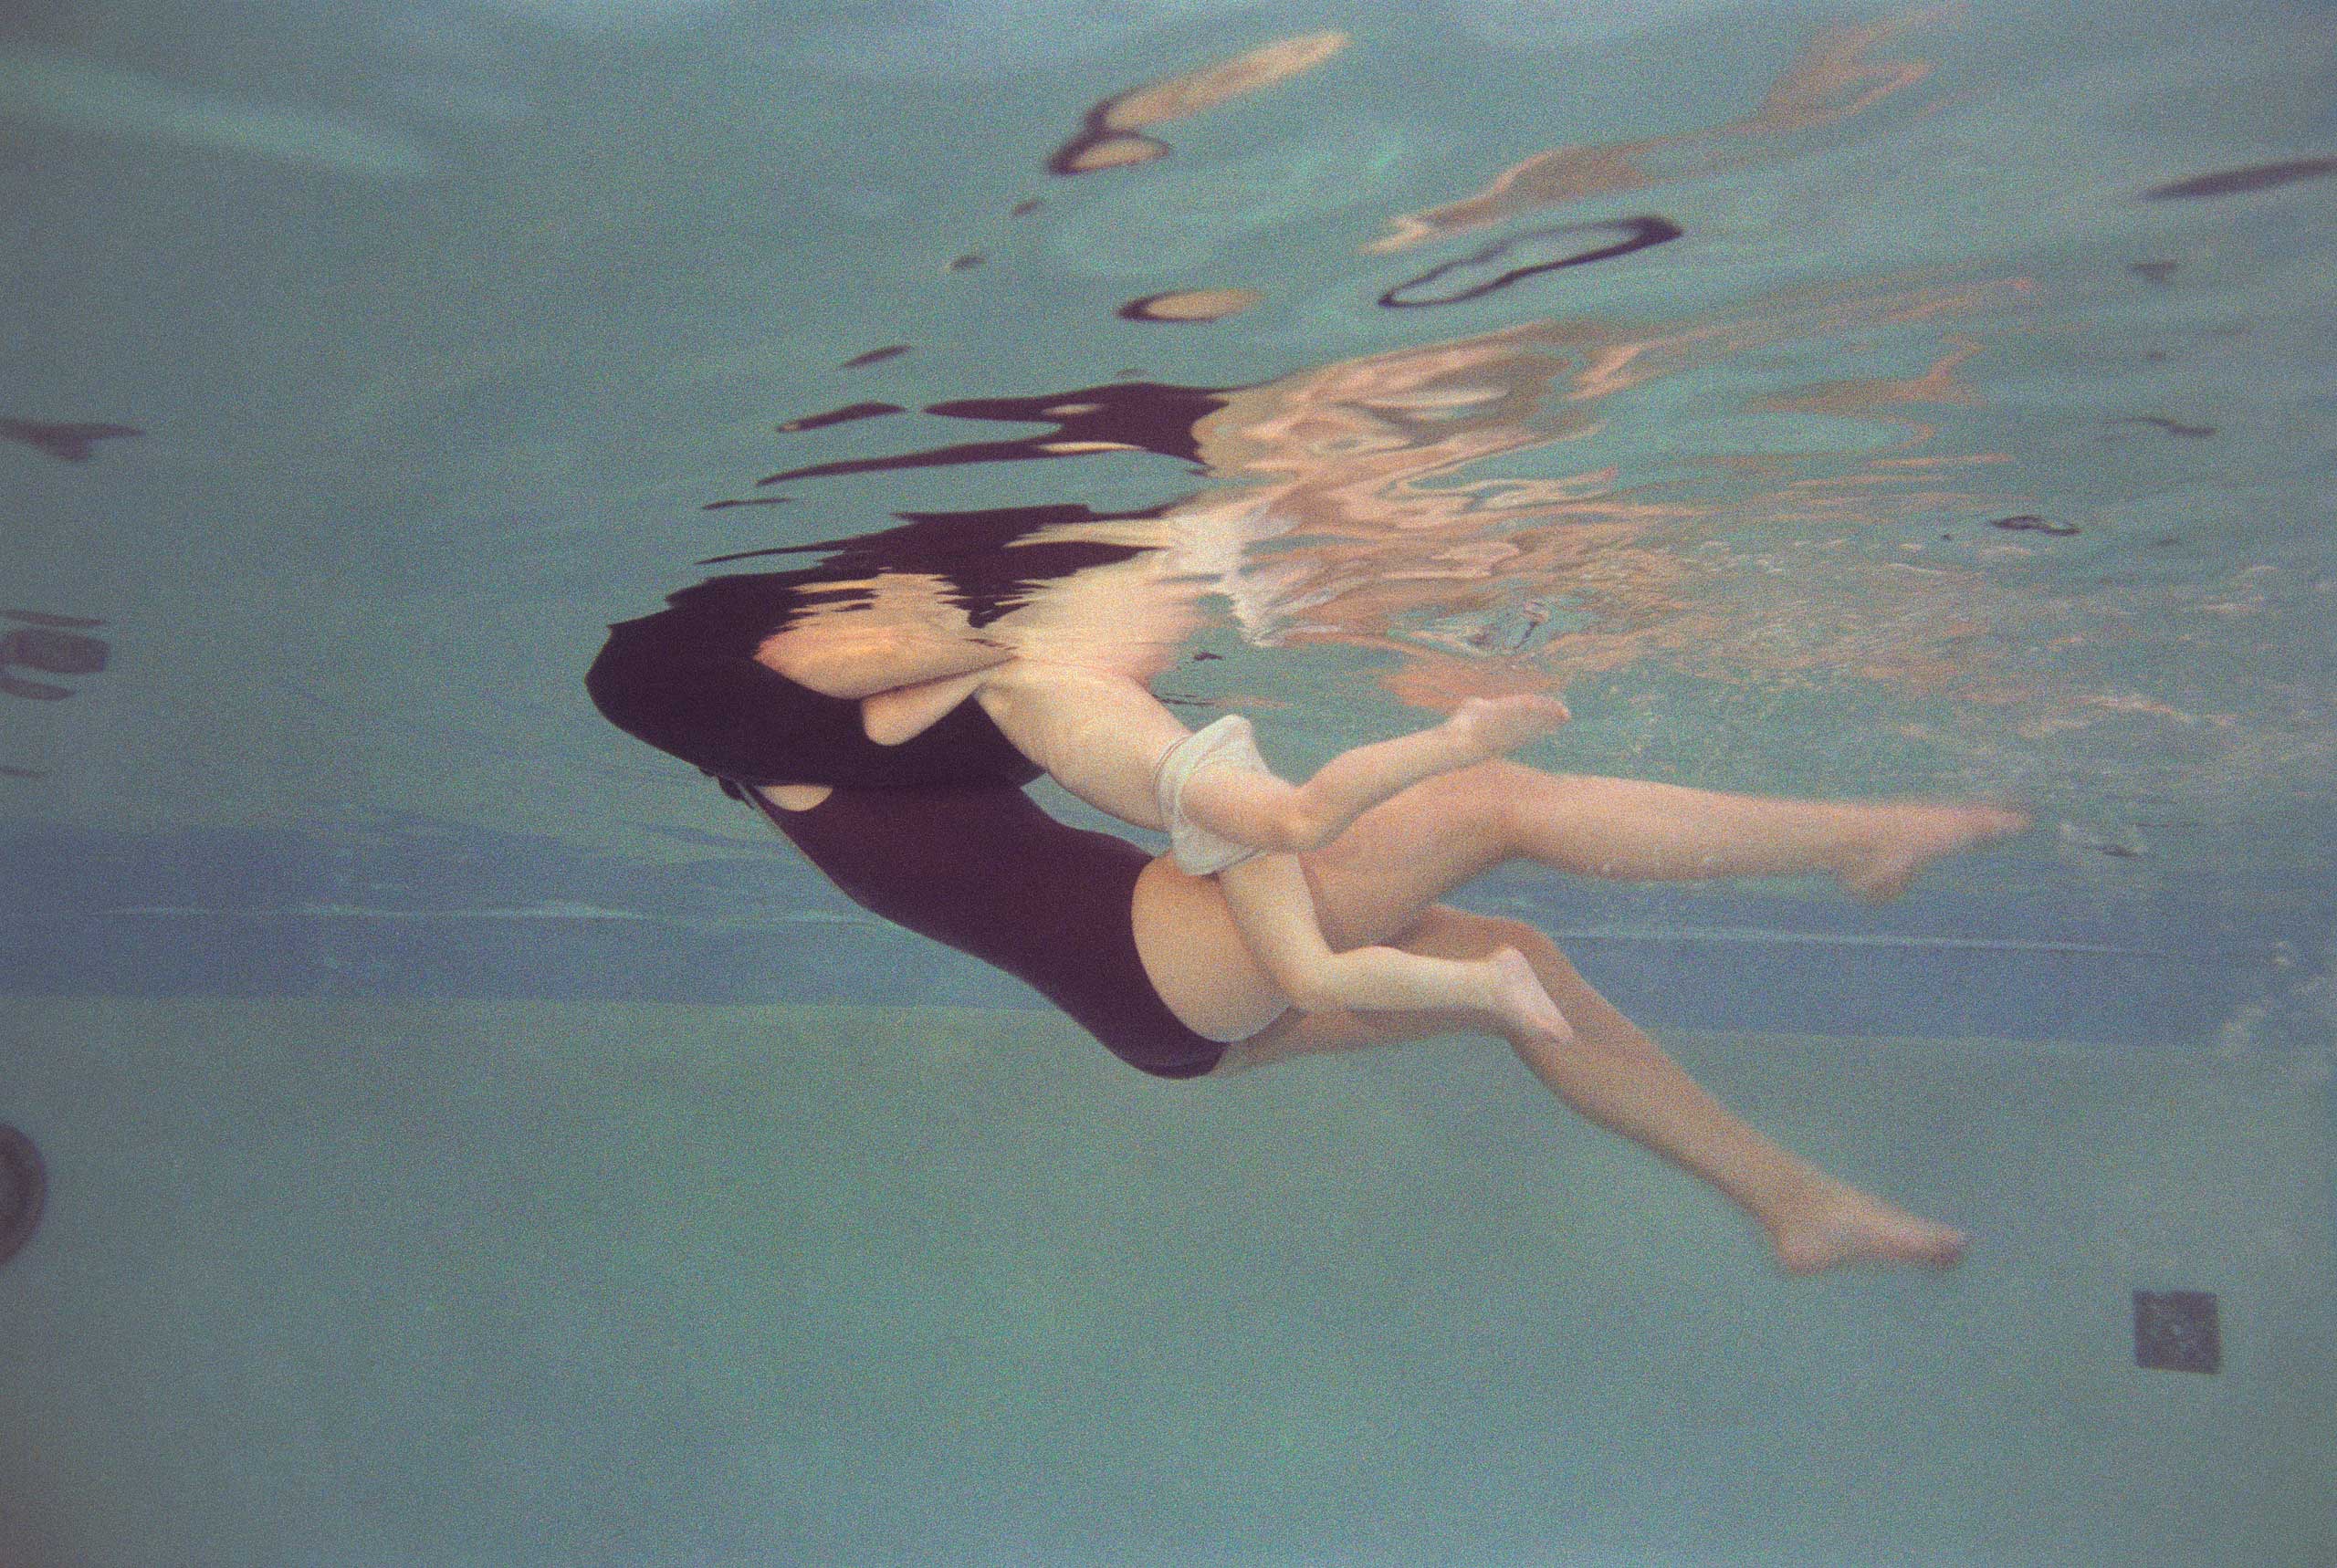 Untitled, 1978-1982, from the series Swimmers